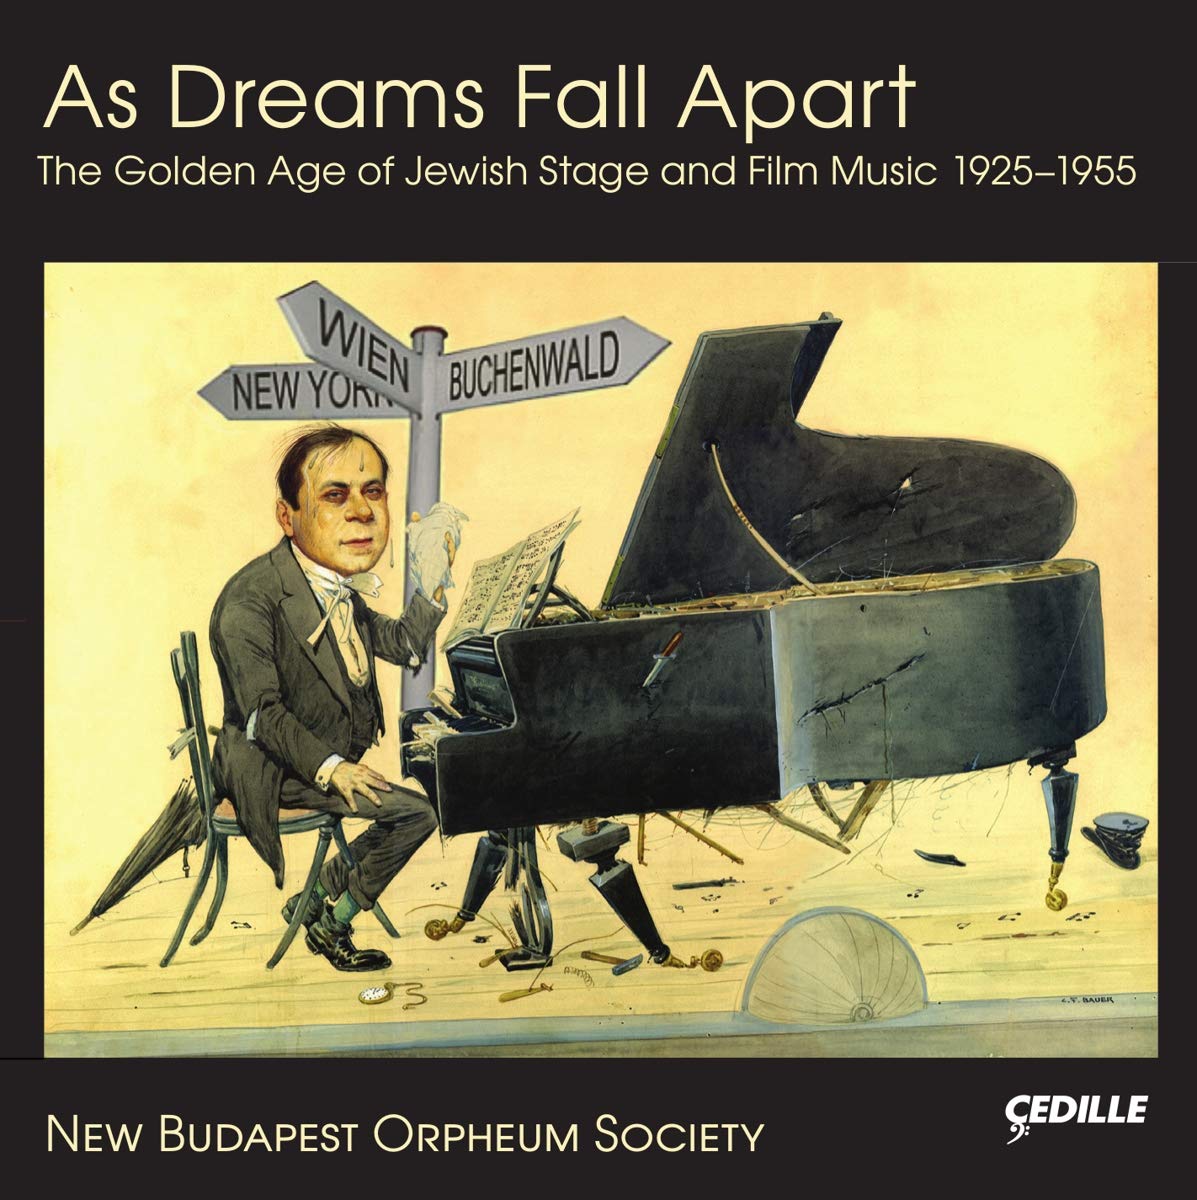 New Budapest Orpheum Society- As Dreams Fall Apart: The Golden Age of Jewish Stage and Film Music 1925-1955 - Darkside Records